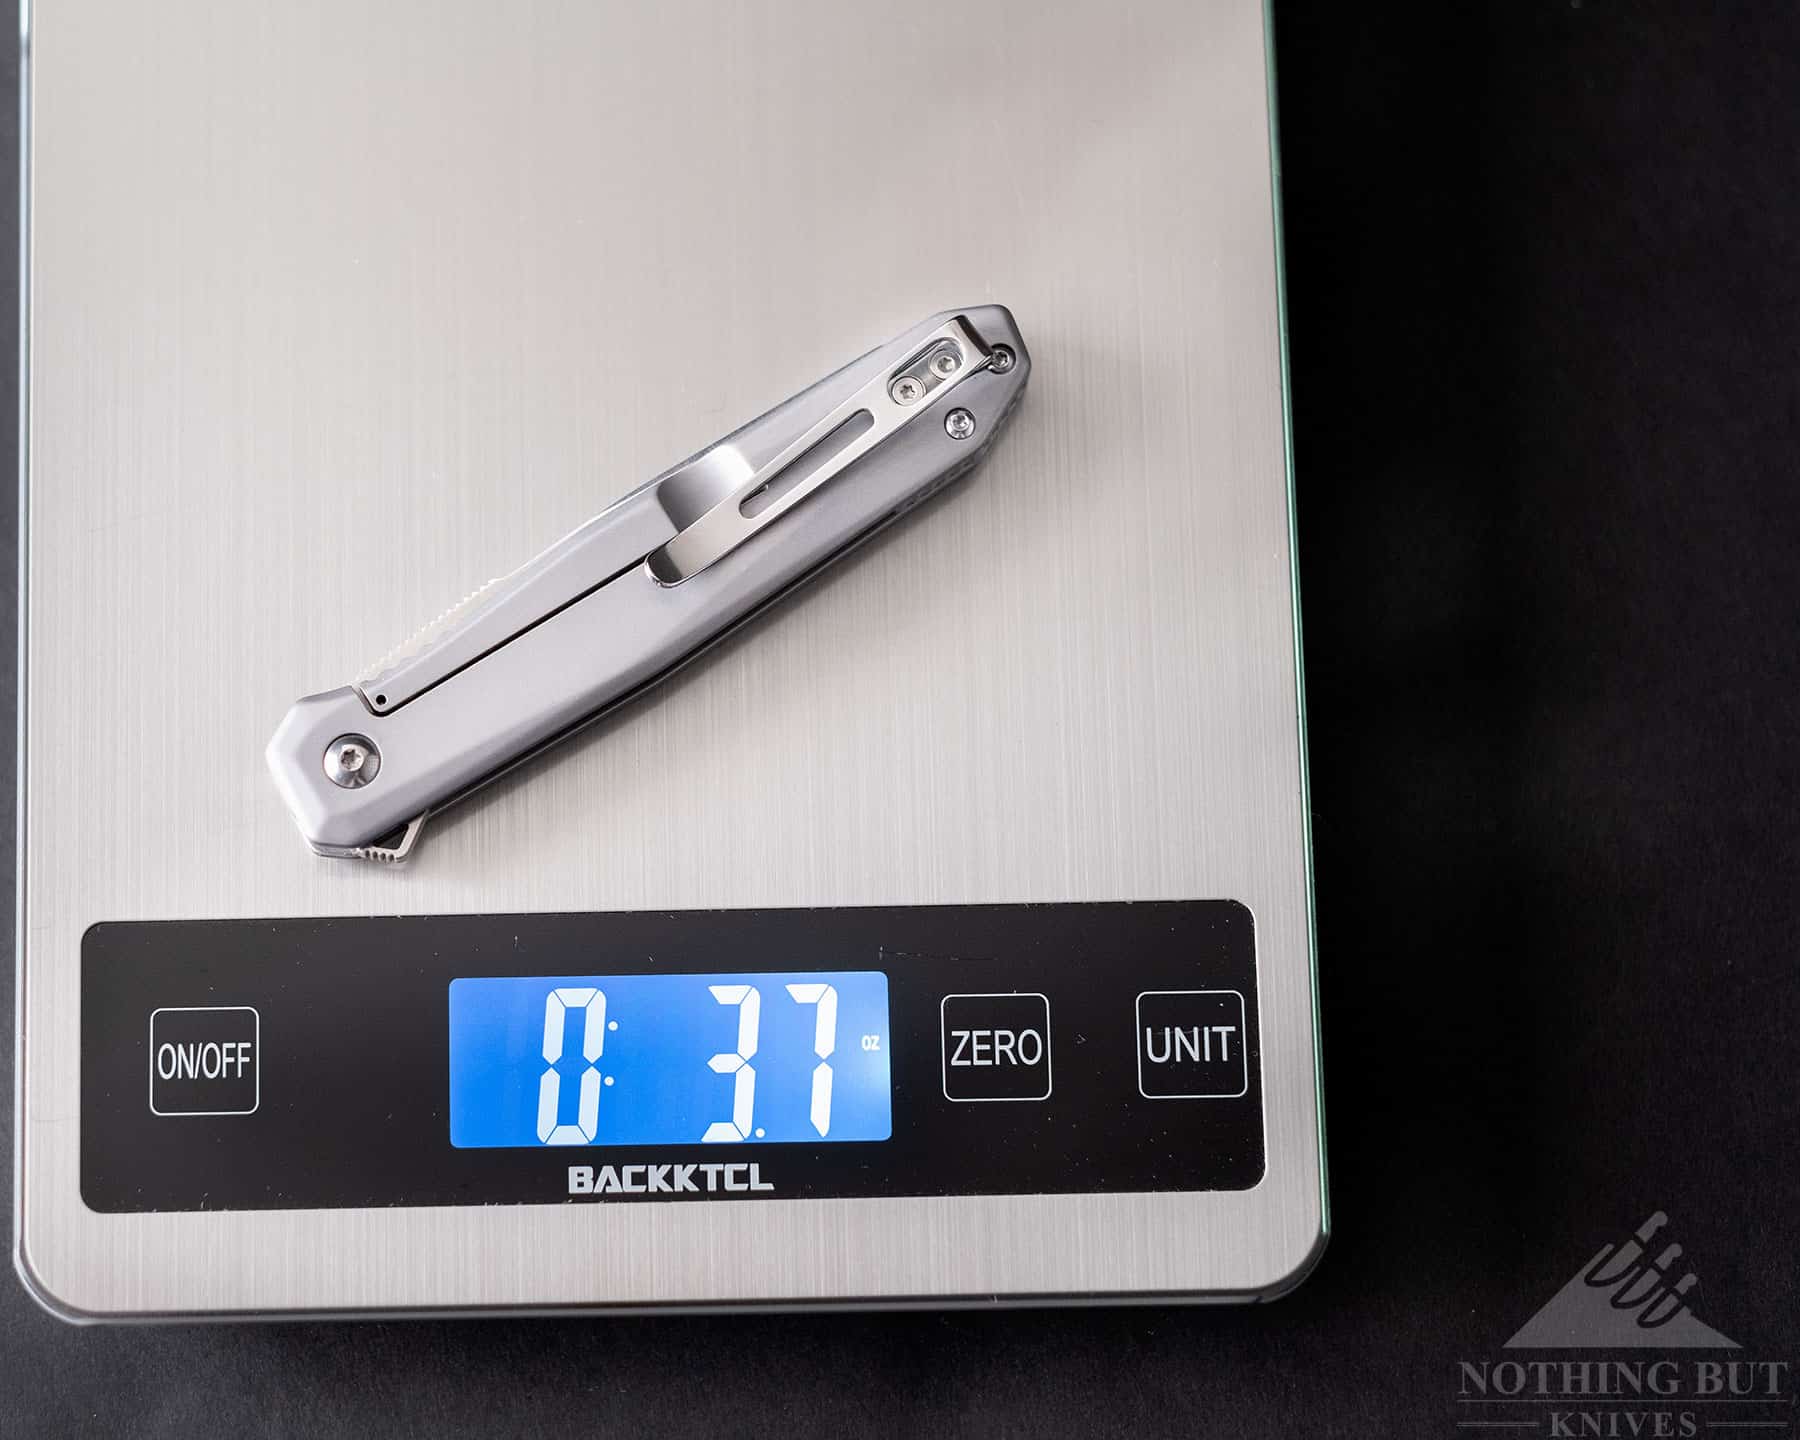 This image of the CRKT Facet pocket knife on a scale shows it's weight.